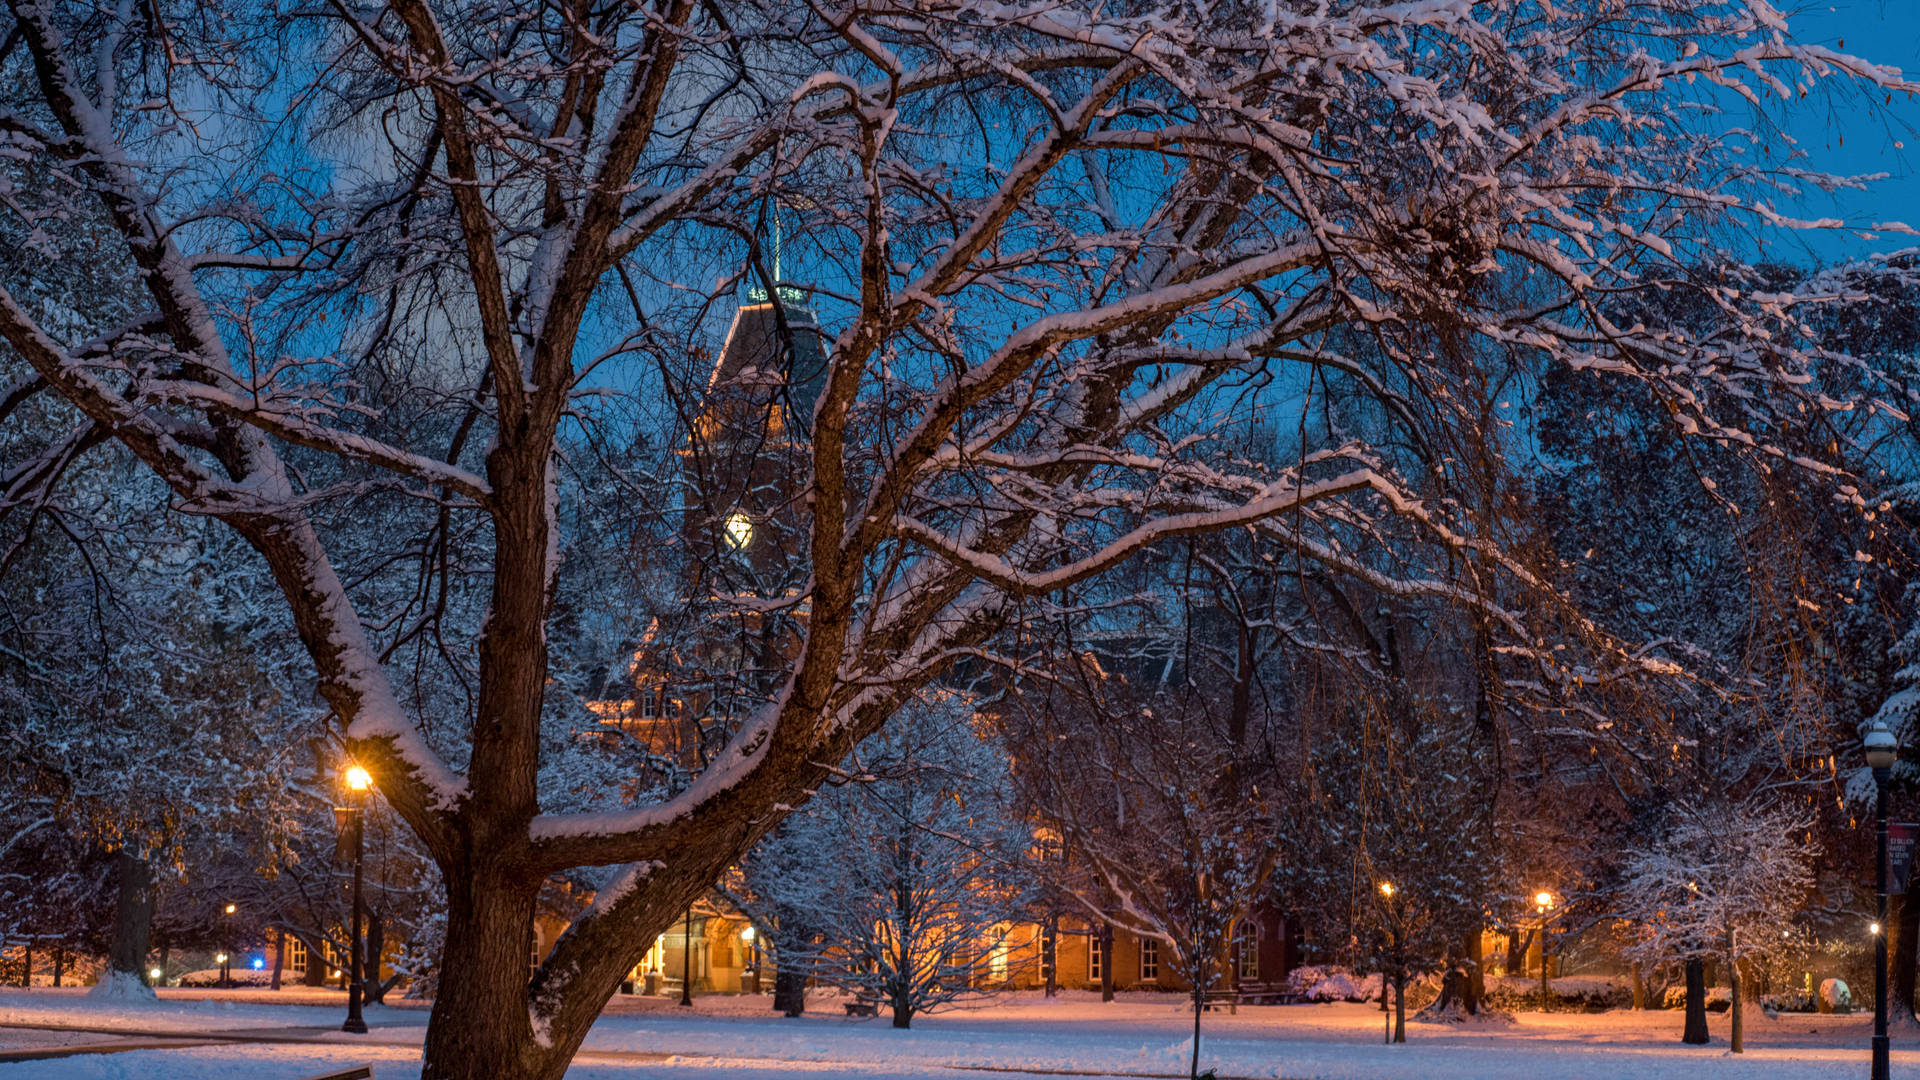 Ohio State University Snow-Covered Campus Wallpaper